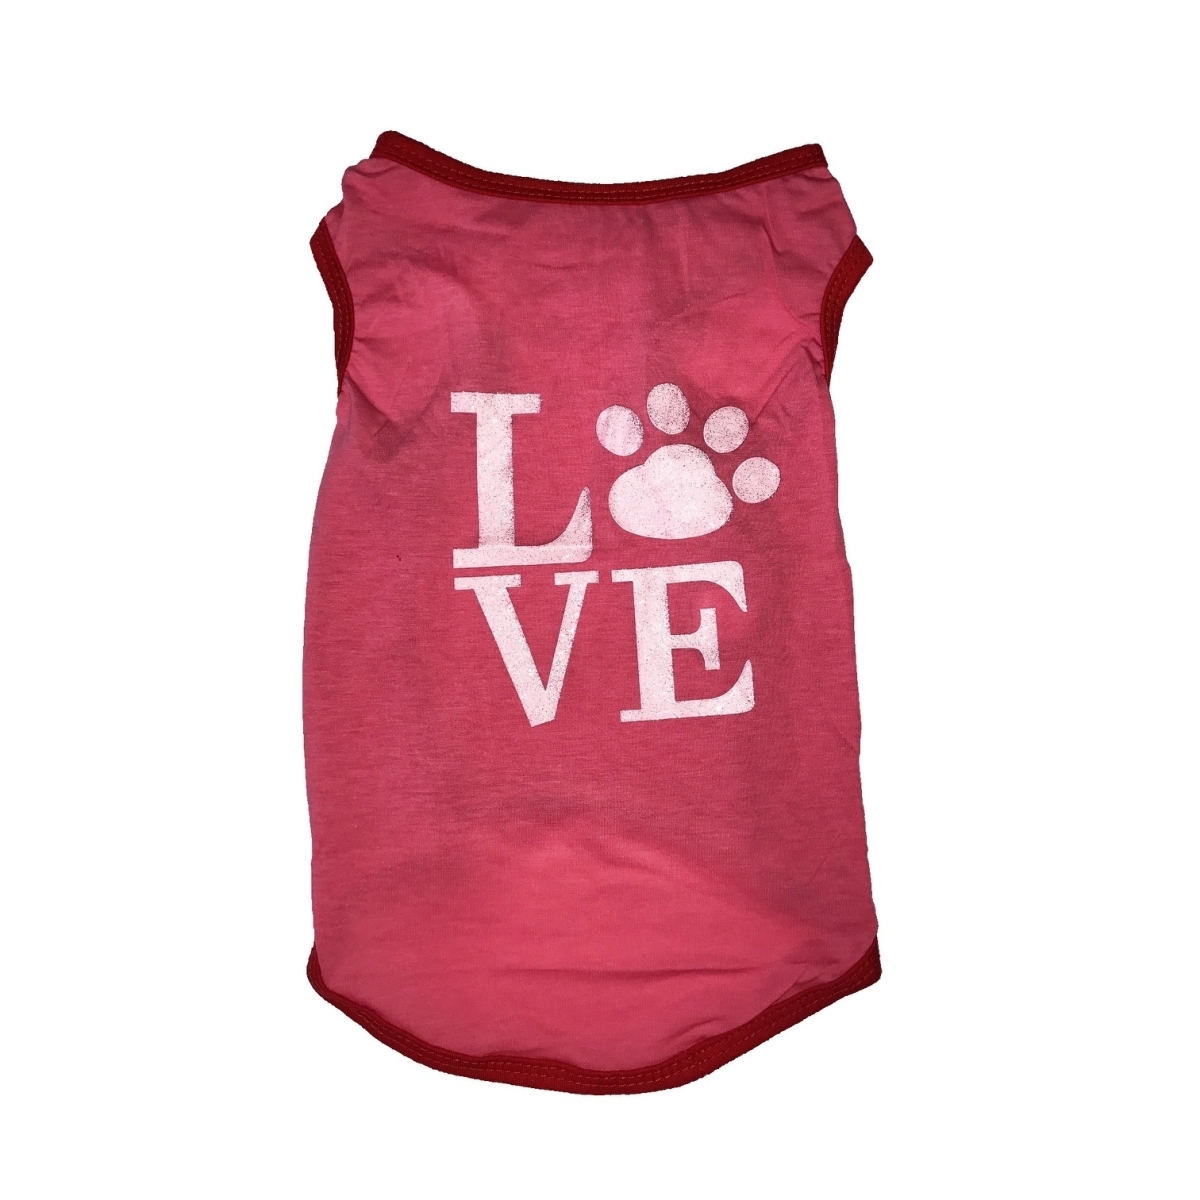 Dgpaw-s Love Paw, Pink - Small